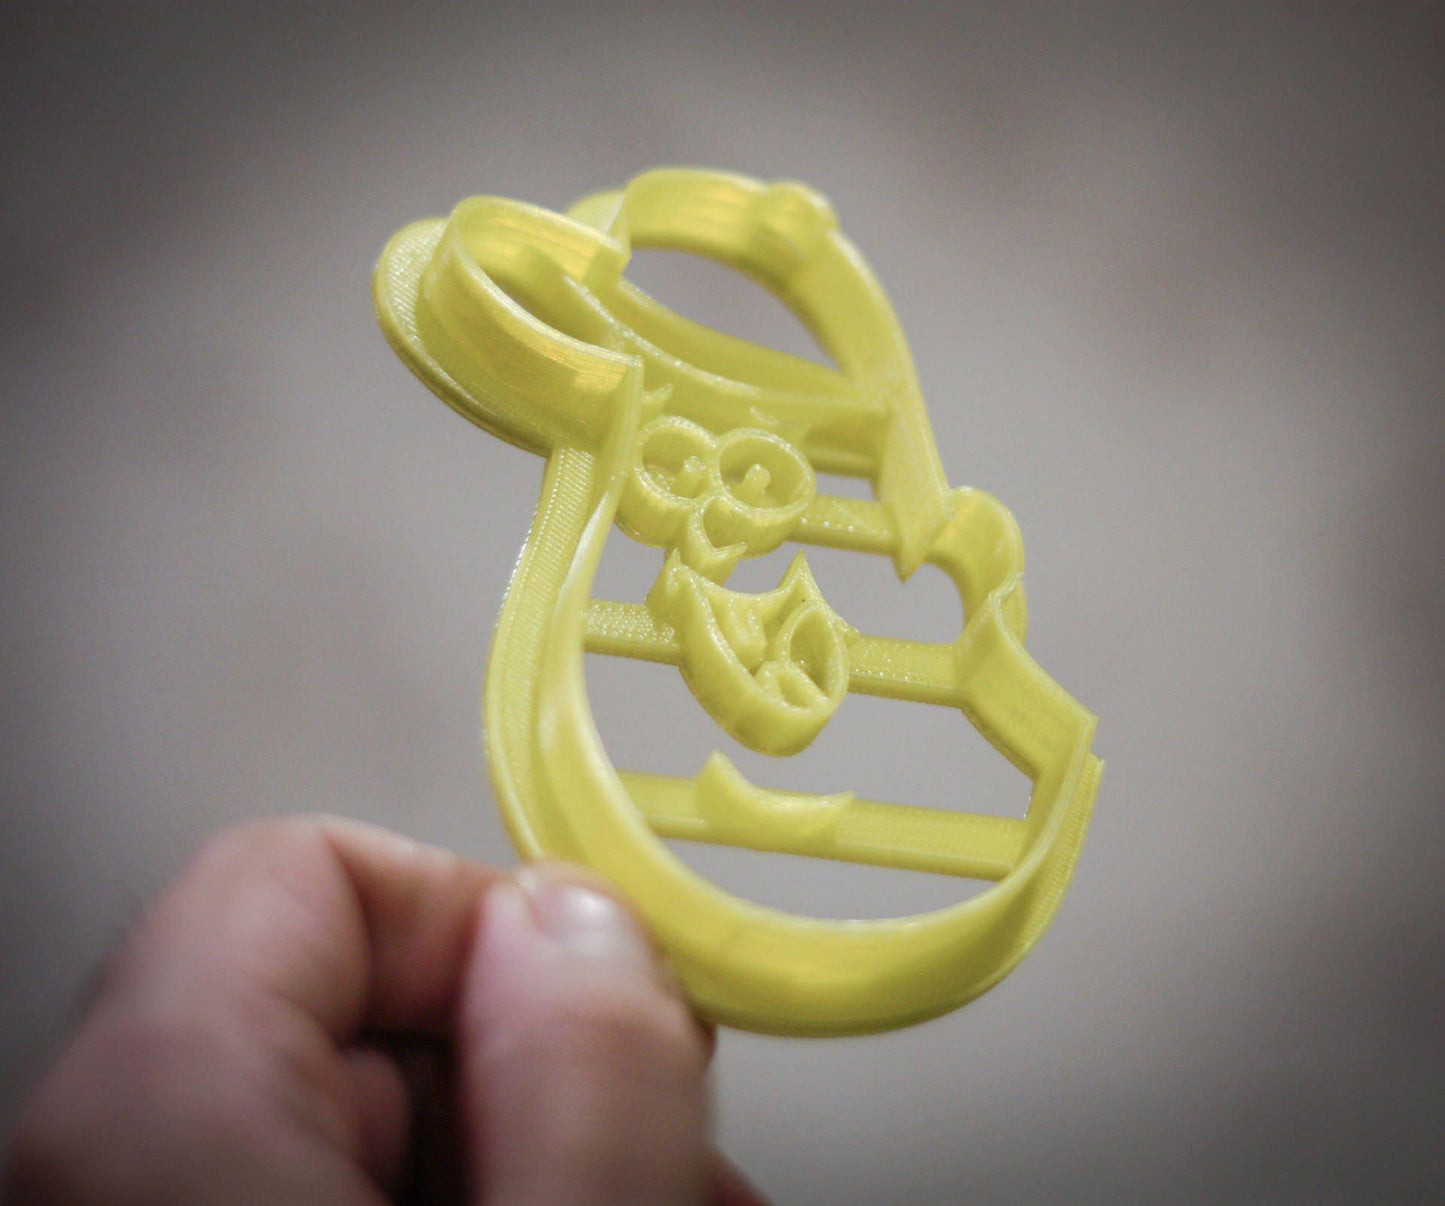 Soos Ramirez | Gravity Falls Cookie Cutter | Baking Gifts | designer cutters | biscuit cutters | Cutters cookie stamp - 3DPrintProps